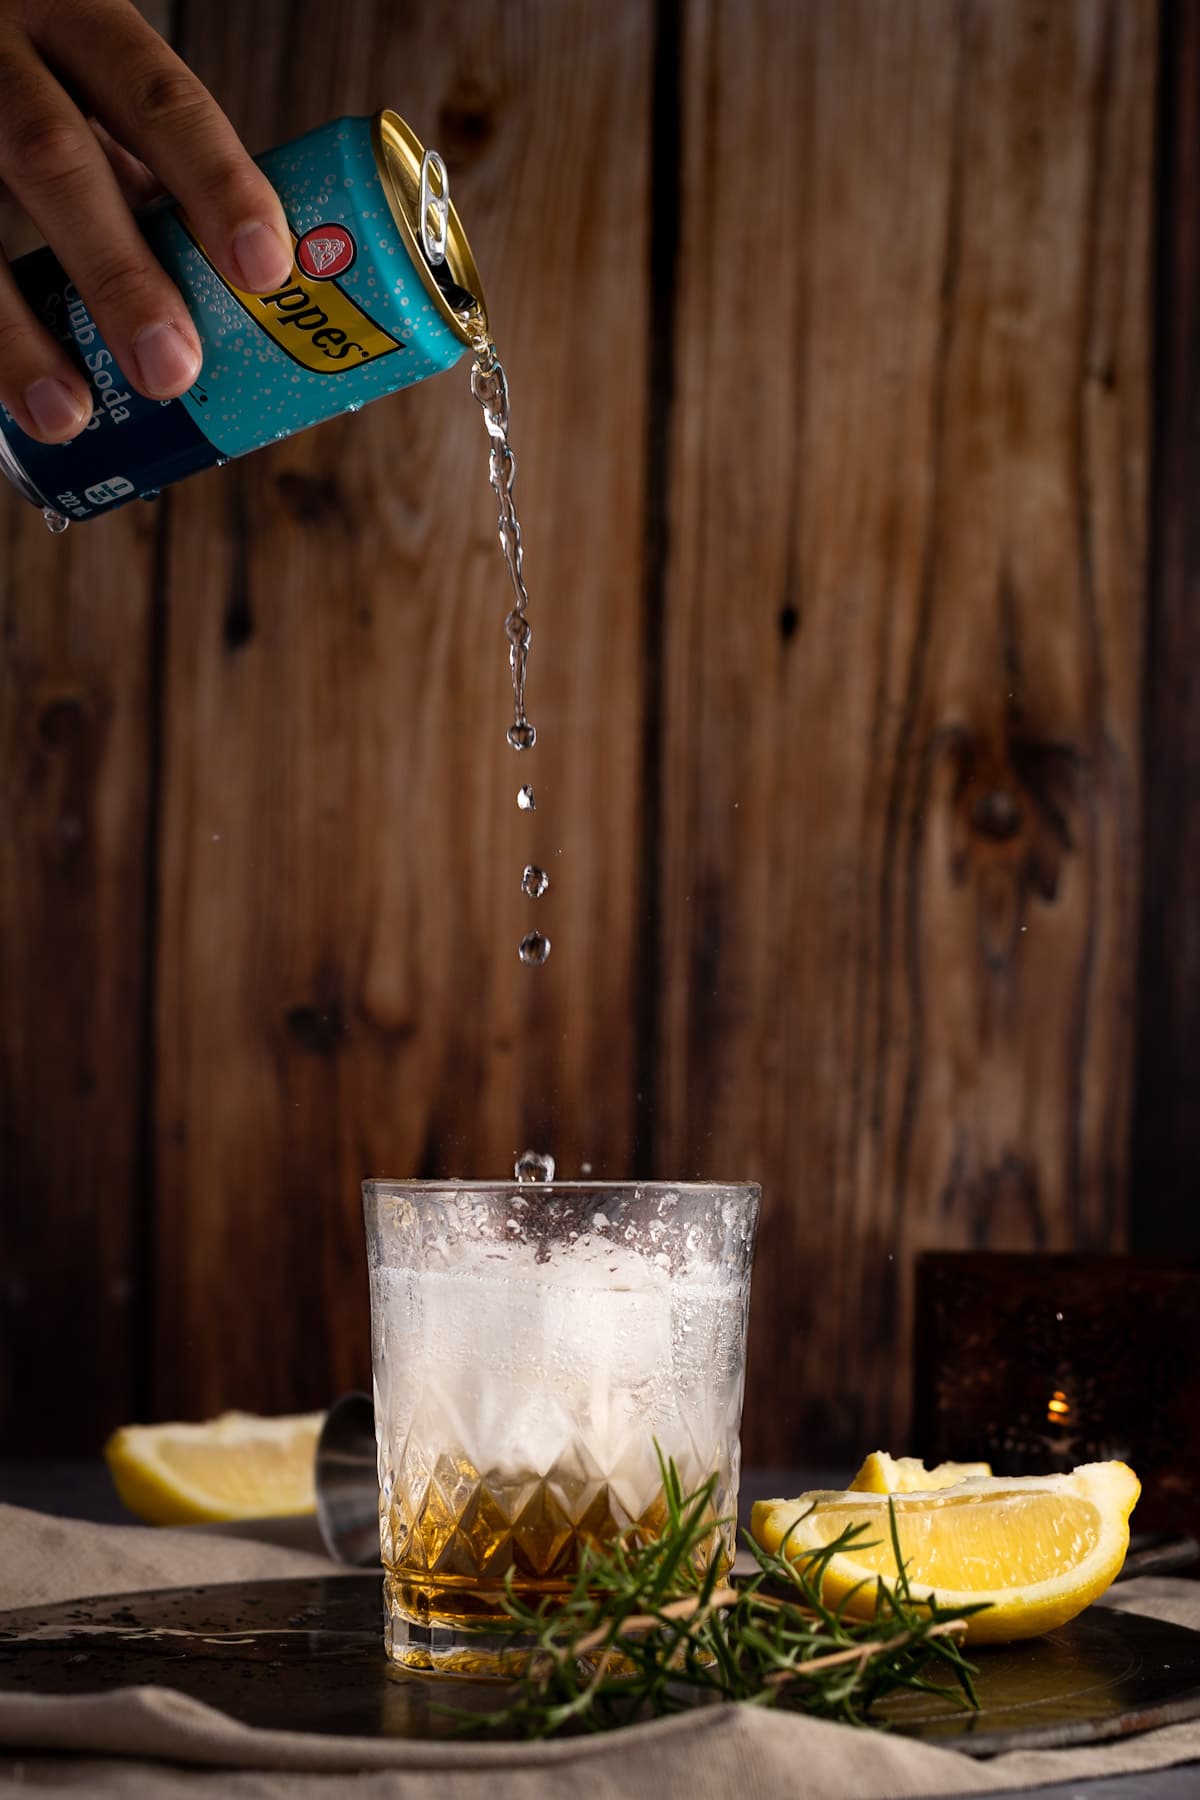 Club soda being poured into the cocktail, sitting on a dark metal plate, next to rosemary and lemon slices, with a dark wood background.